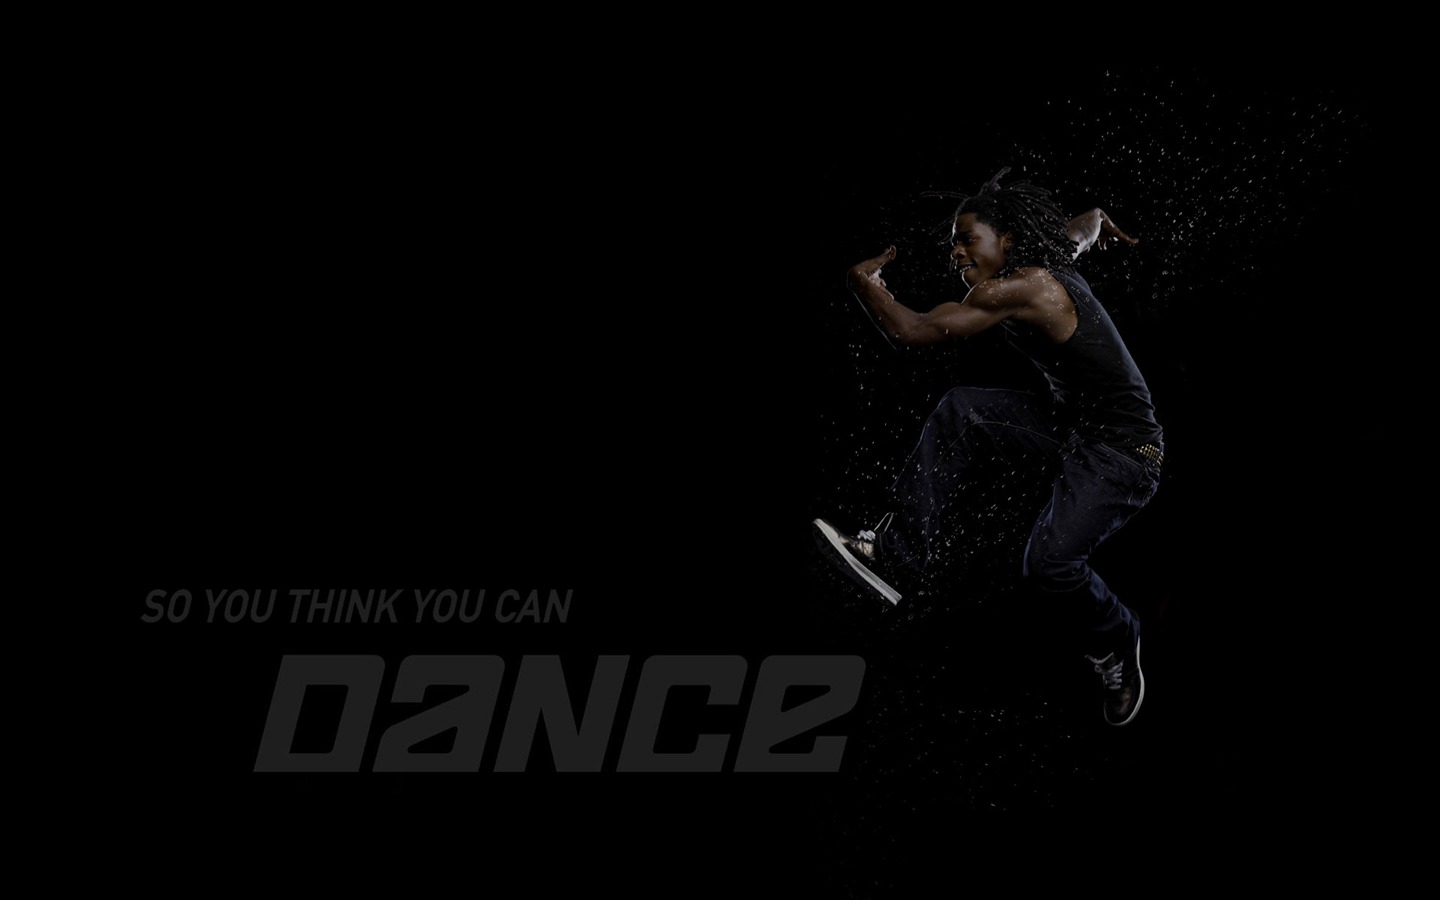 So You Think You Can Dance 舞林爭霸壁紙(二) #16 - 1440x900